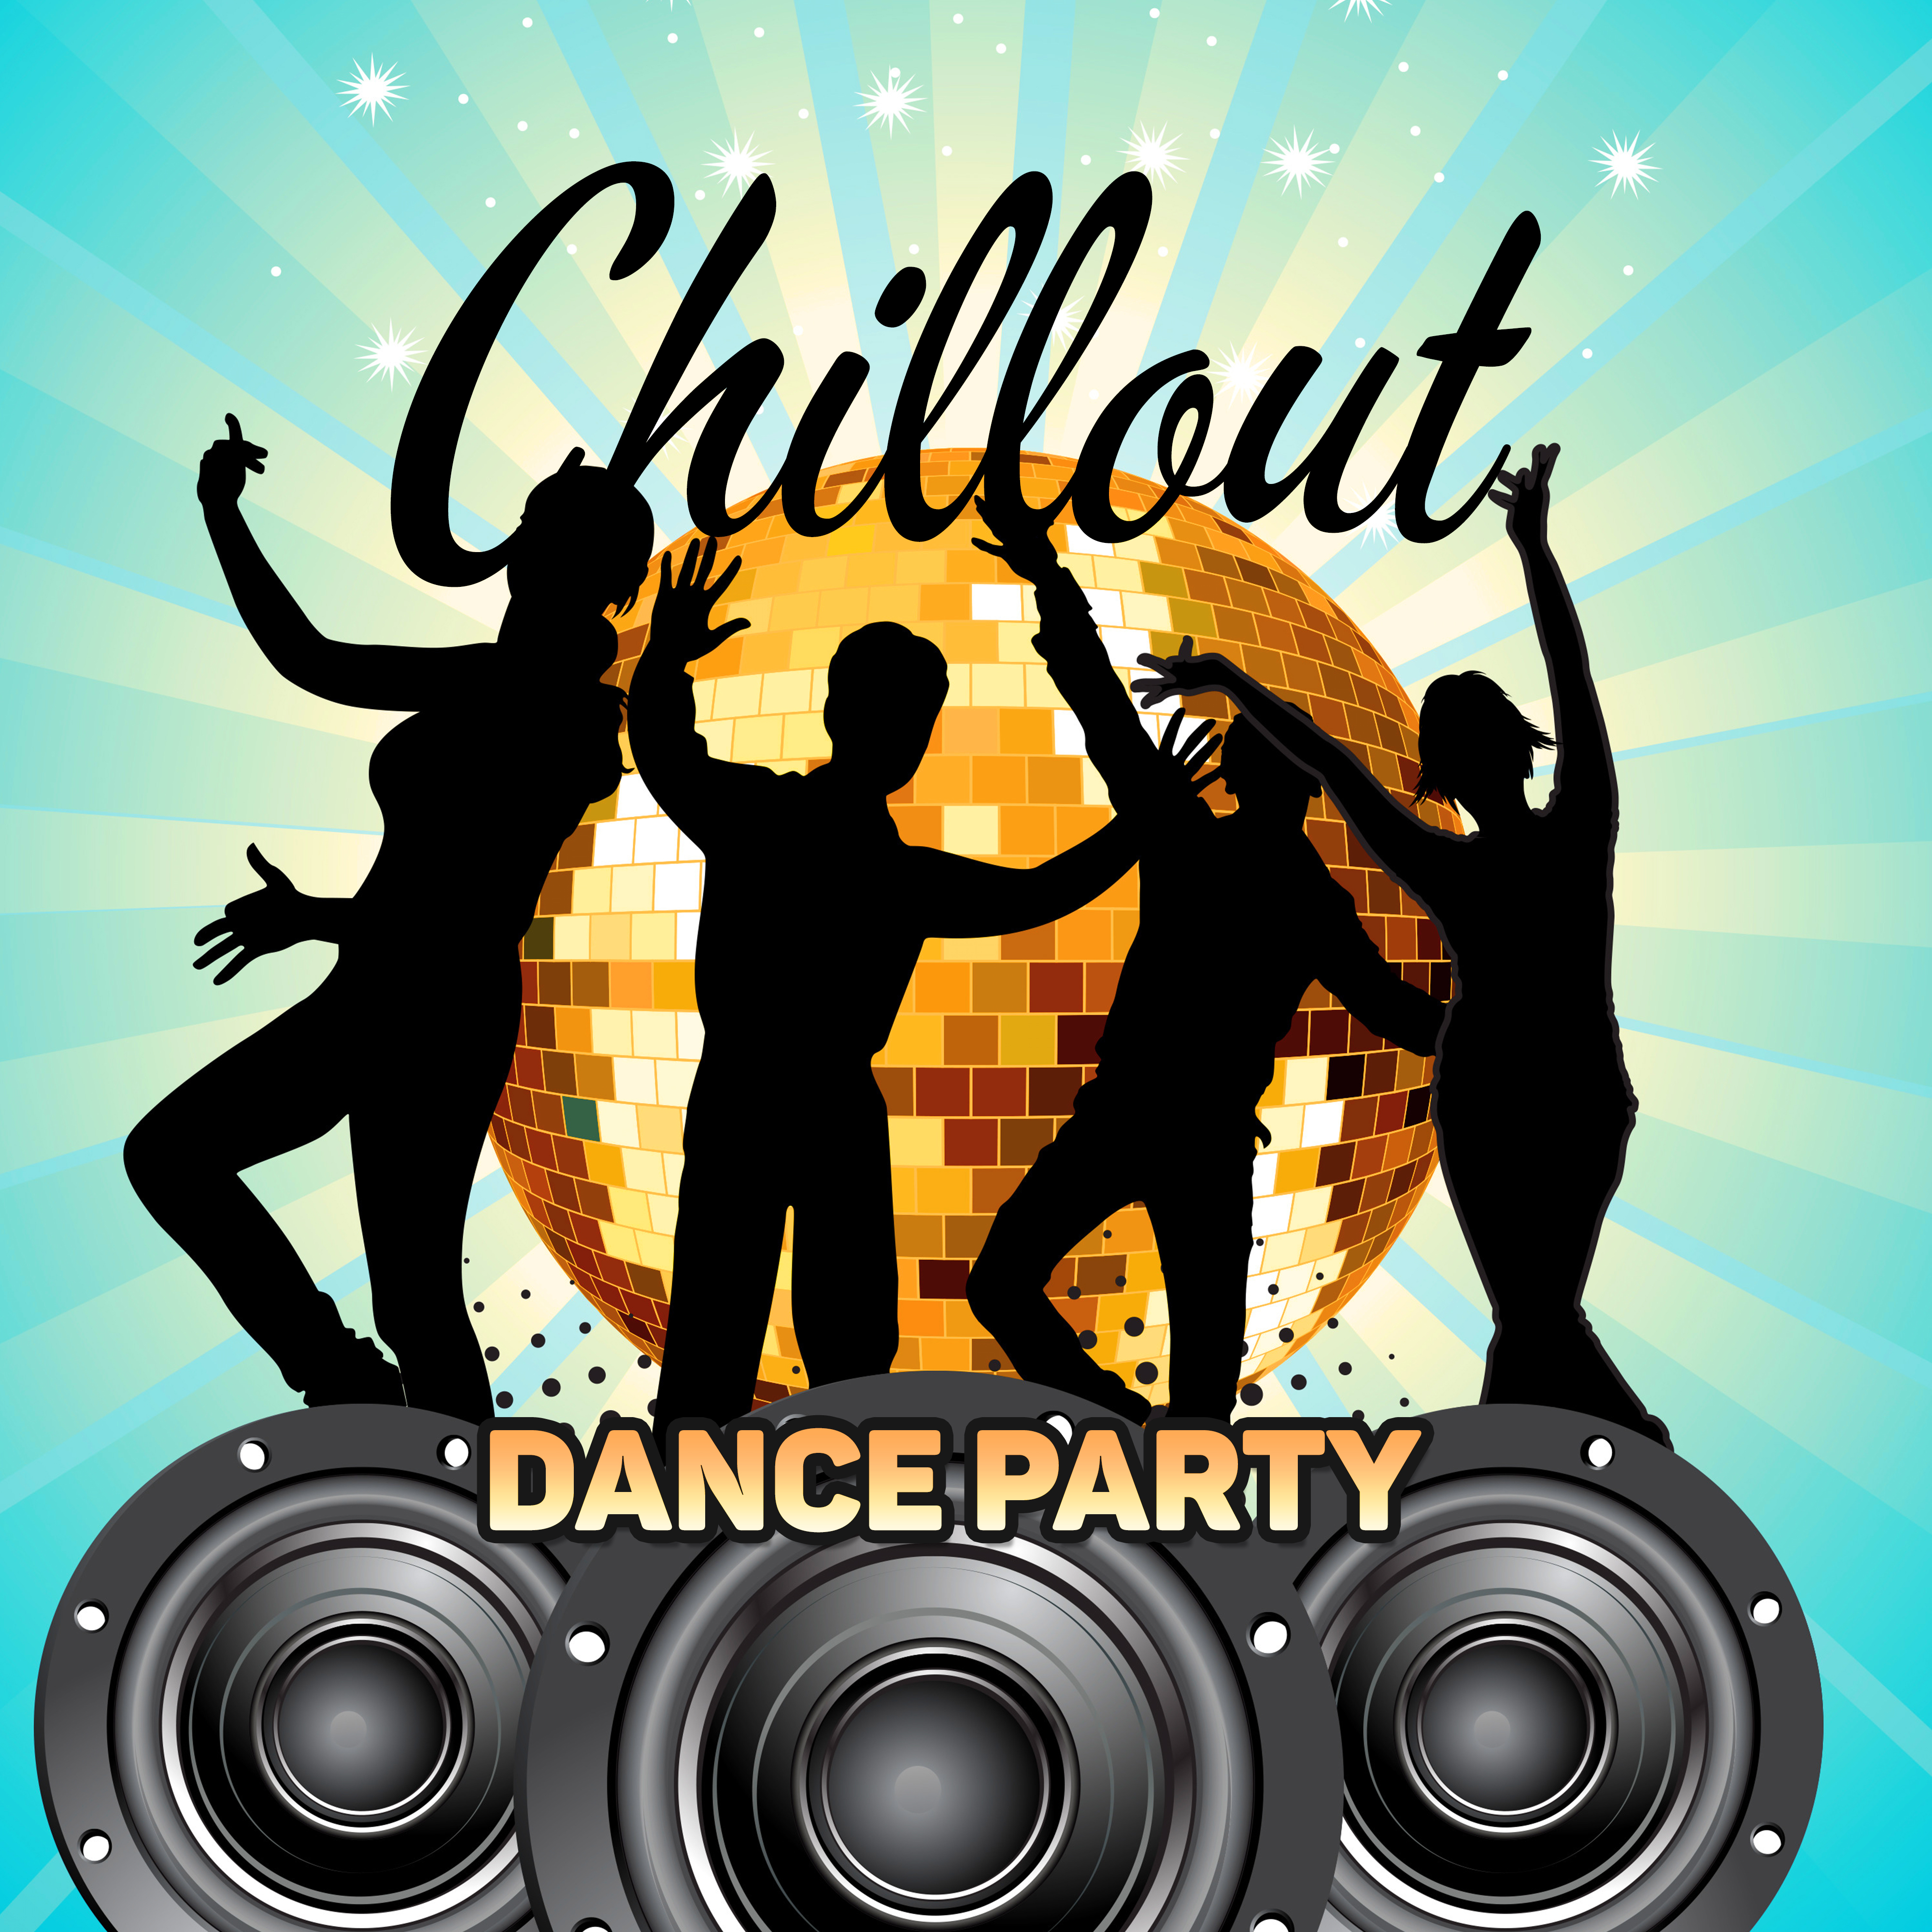 Chillout Dance Party – Electronic Music, Chill Out 2017, Relax, Trance Party, Dancefloor